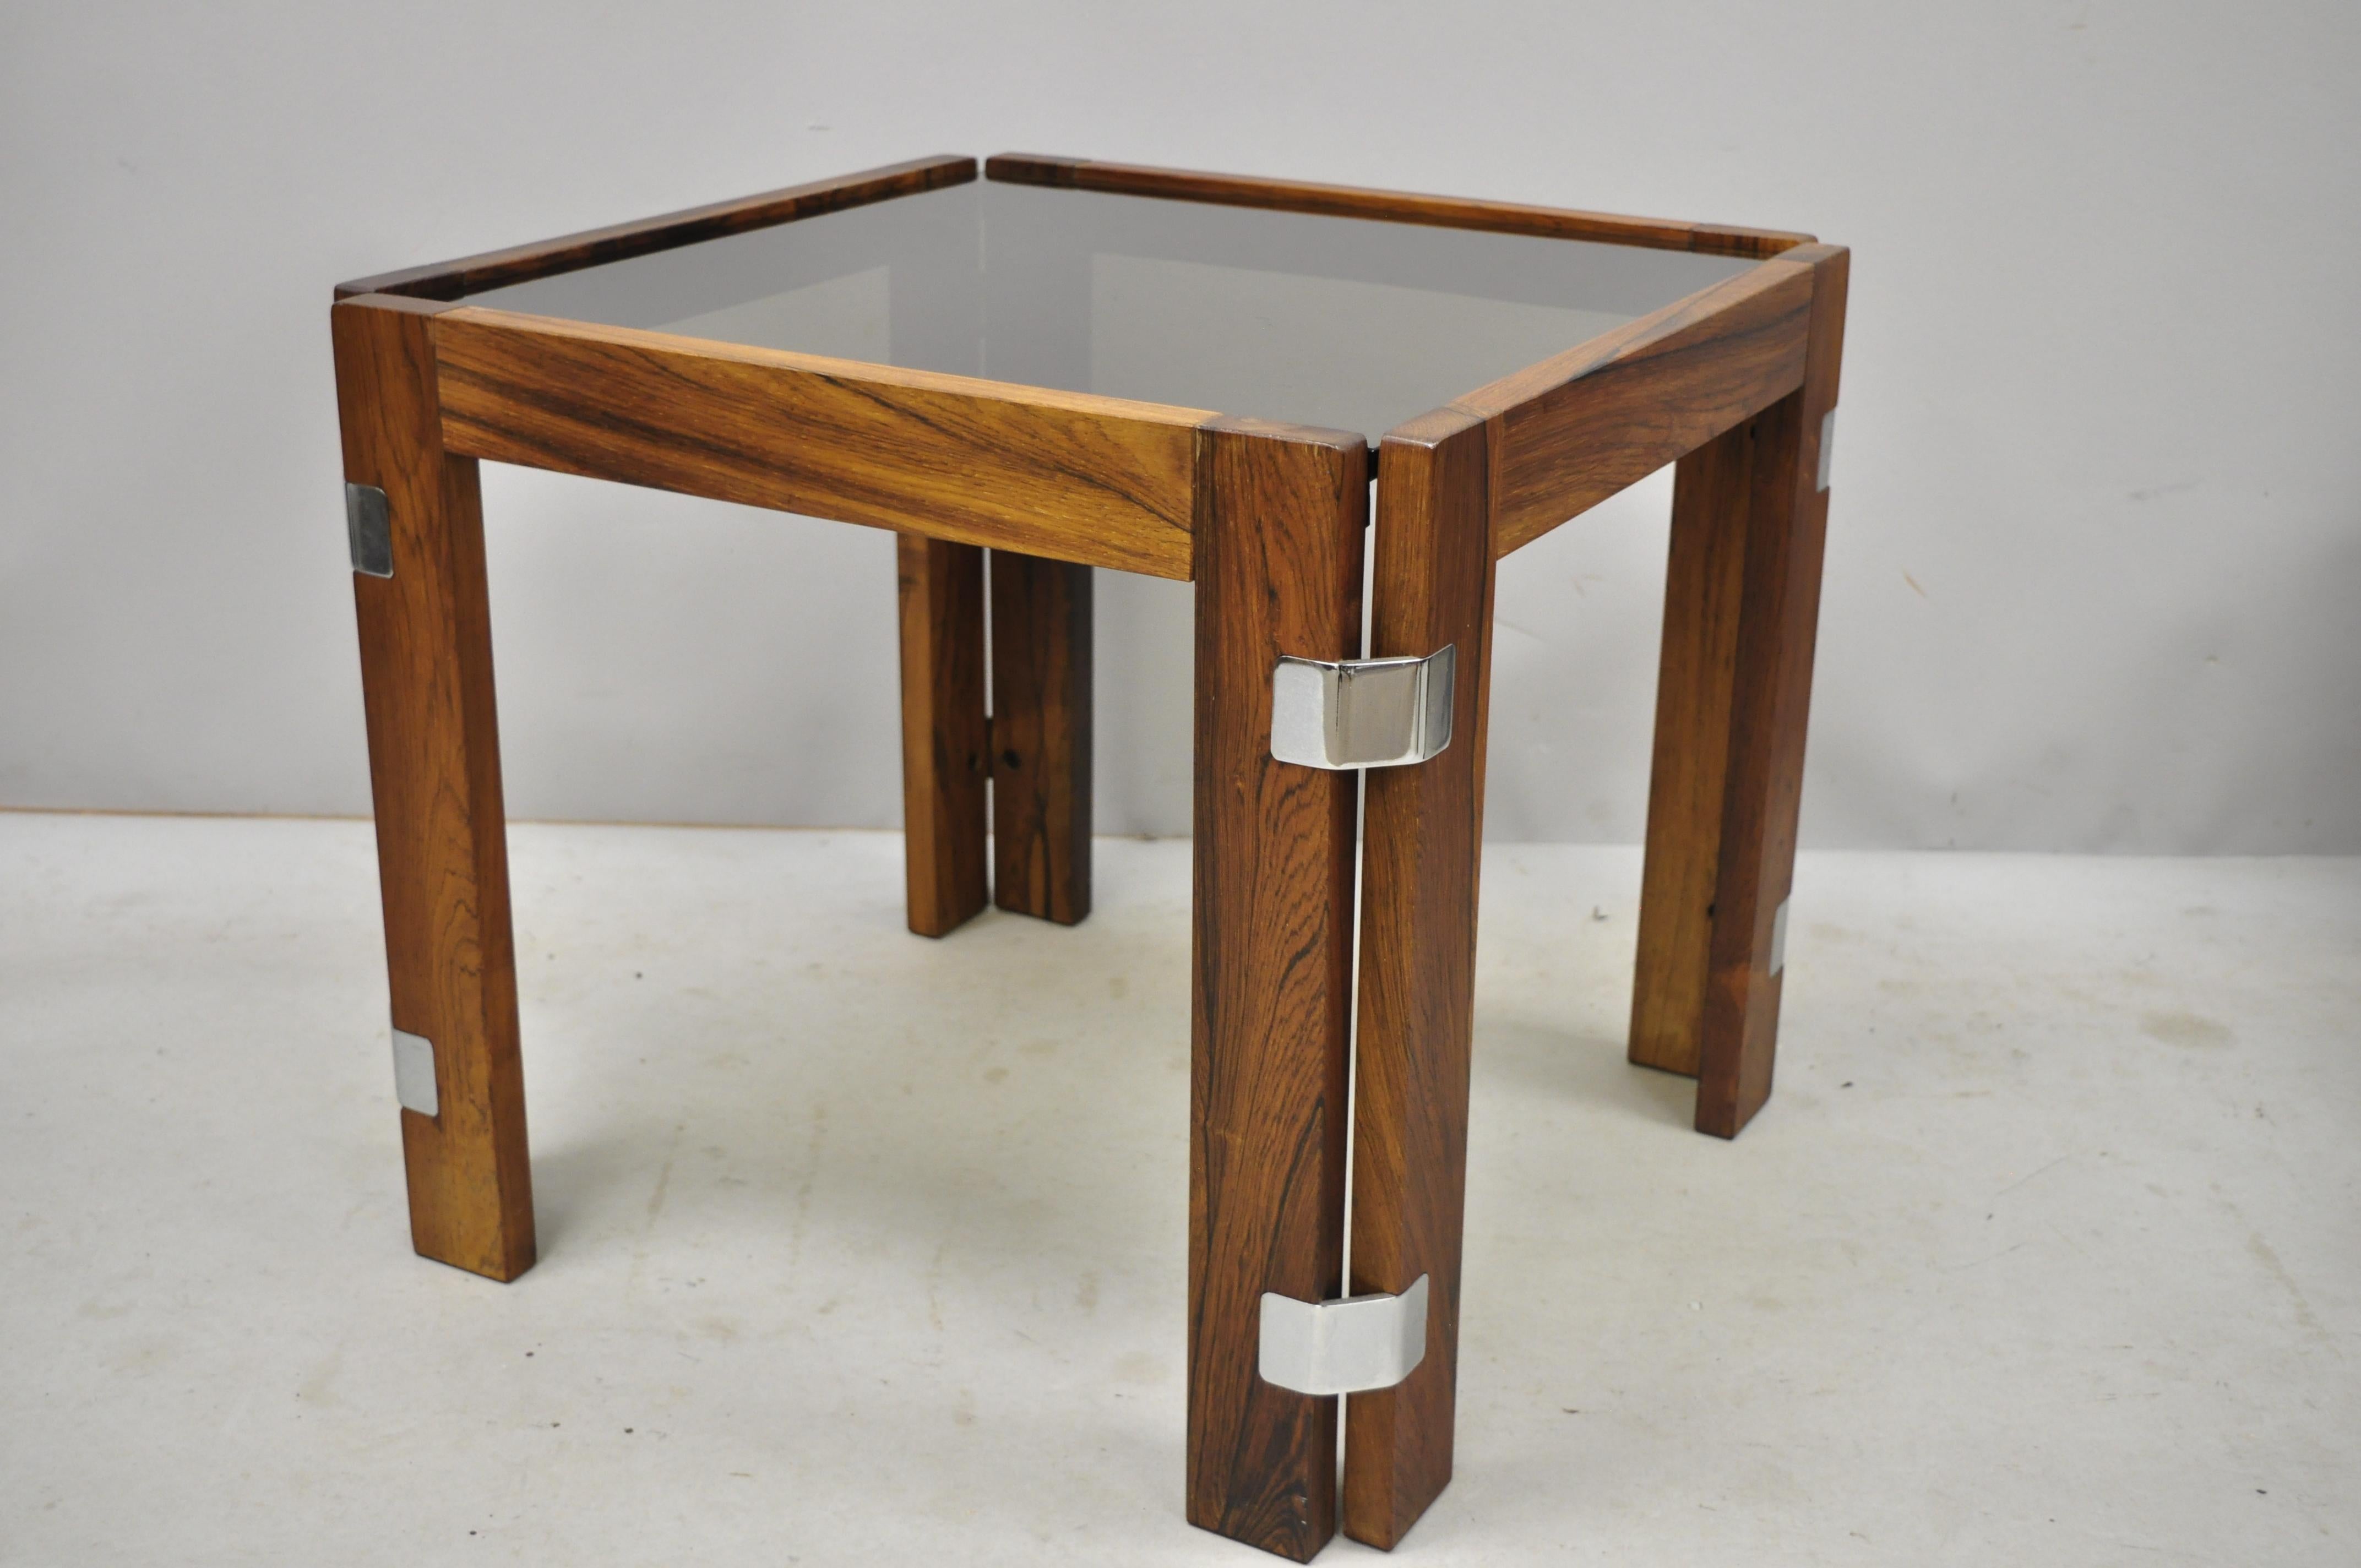 3 Midcentury Danish Modern Rosewood & Smoked Glass Side Tables by Interior Form In Good Condition For Sale In Philadelphia, PA